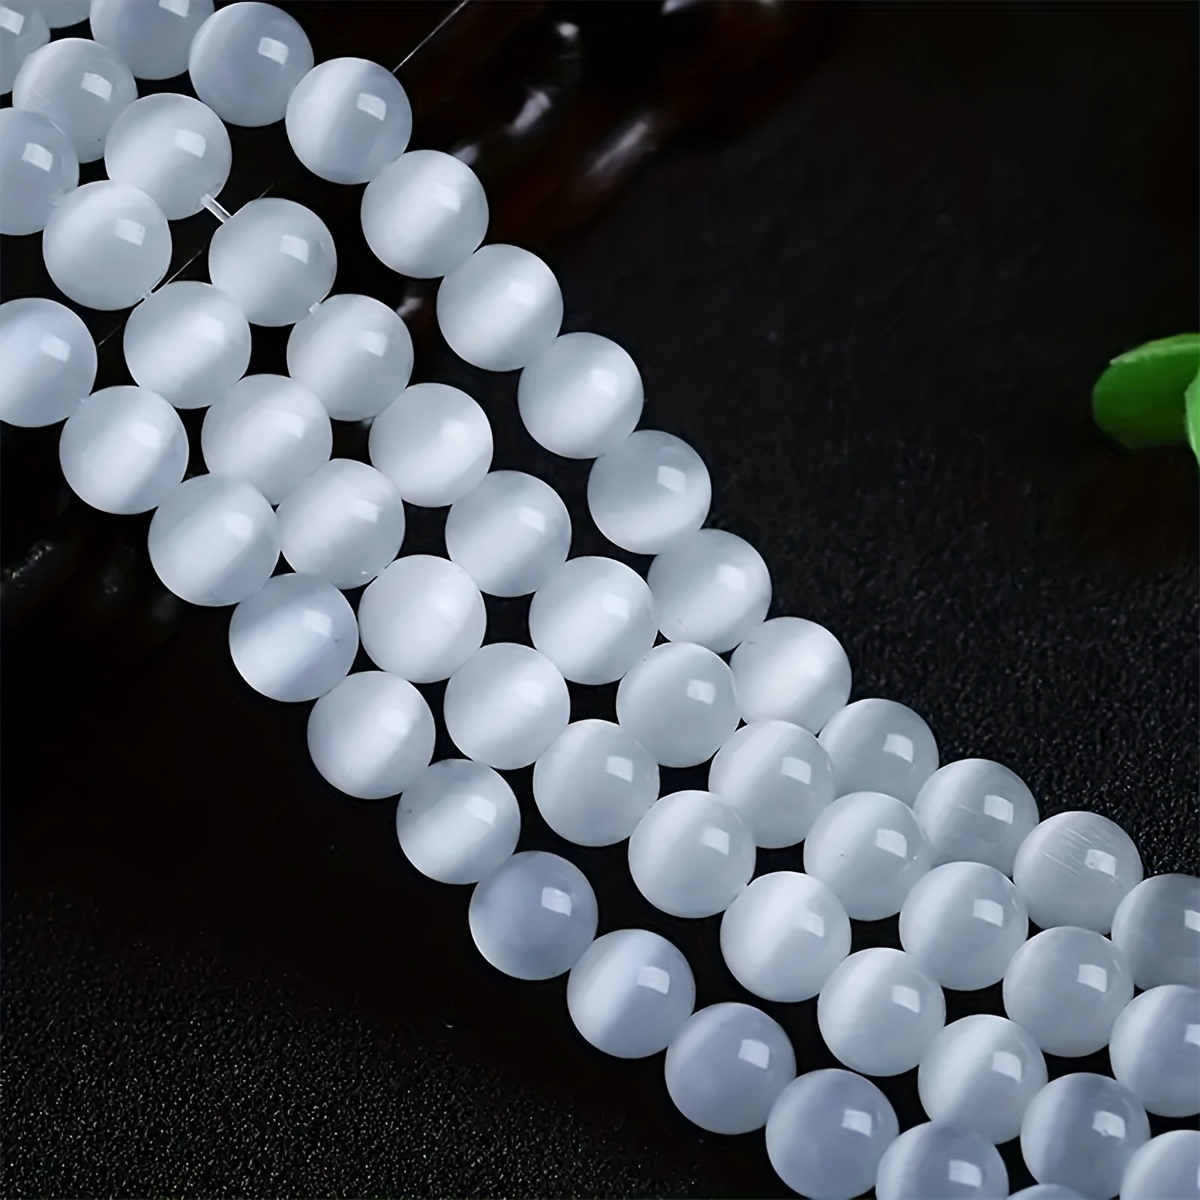 

95/65/50/40pcs 4/6/8/10mm Natural Stone White Cat's Eye Stone Beads With Holes For Beading, Spacer Beads For Jewelry Making Dly Handmade Bracelets, Necklaces, Earrings, Craft Supplies And Accessories